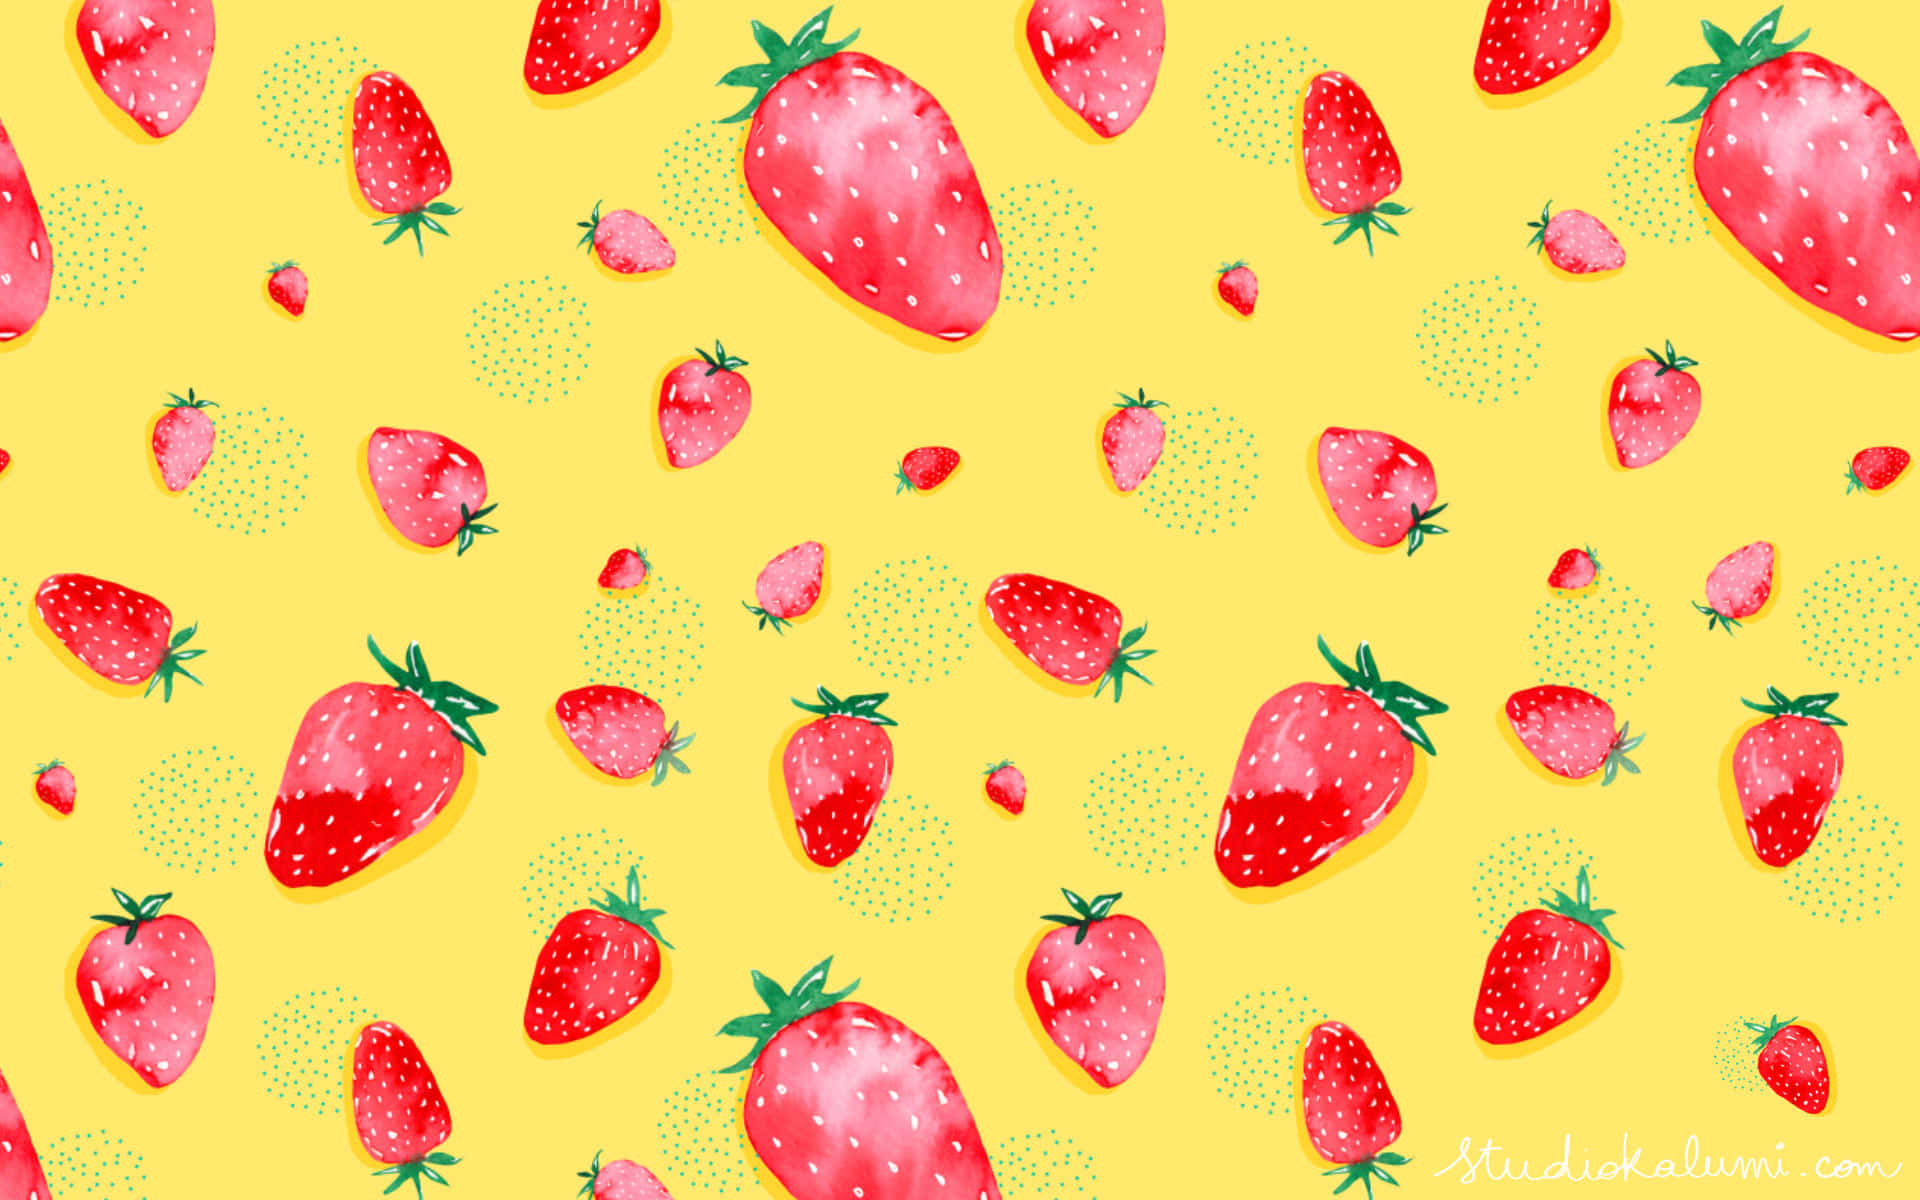 Strawberry Wallpaper - Hd Wallpapers Background